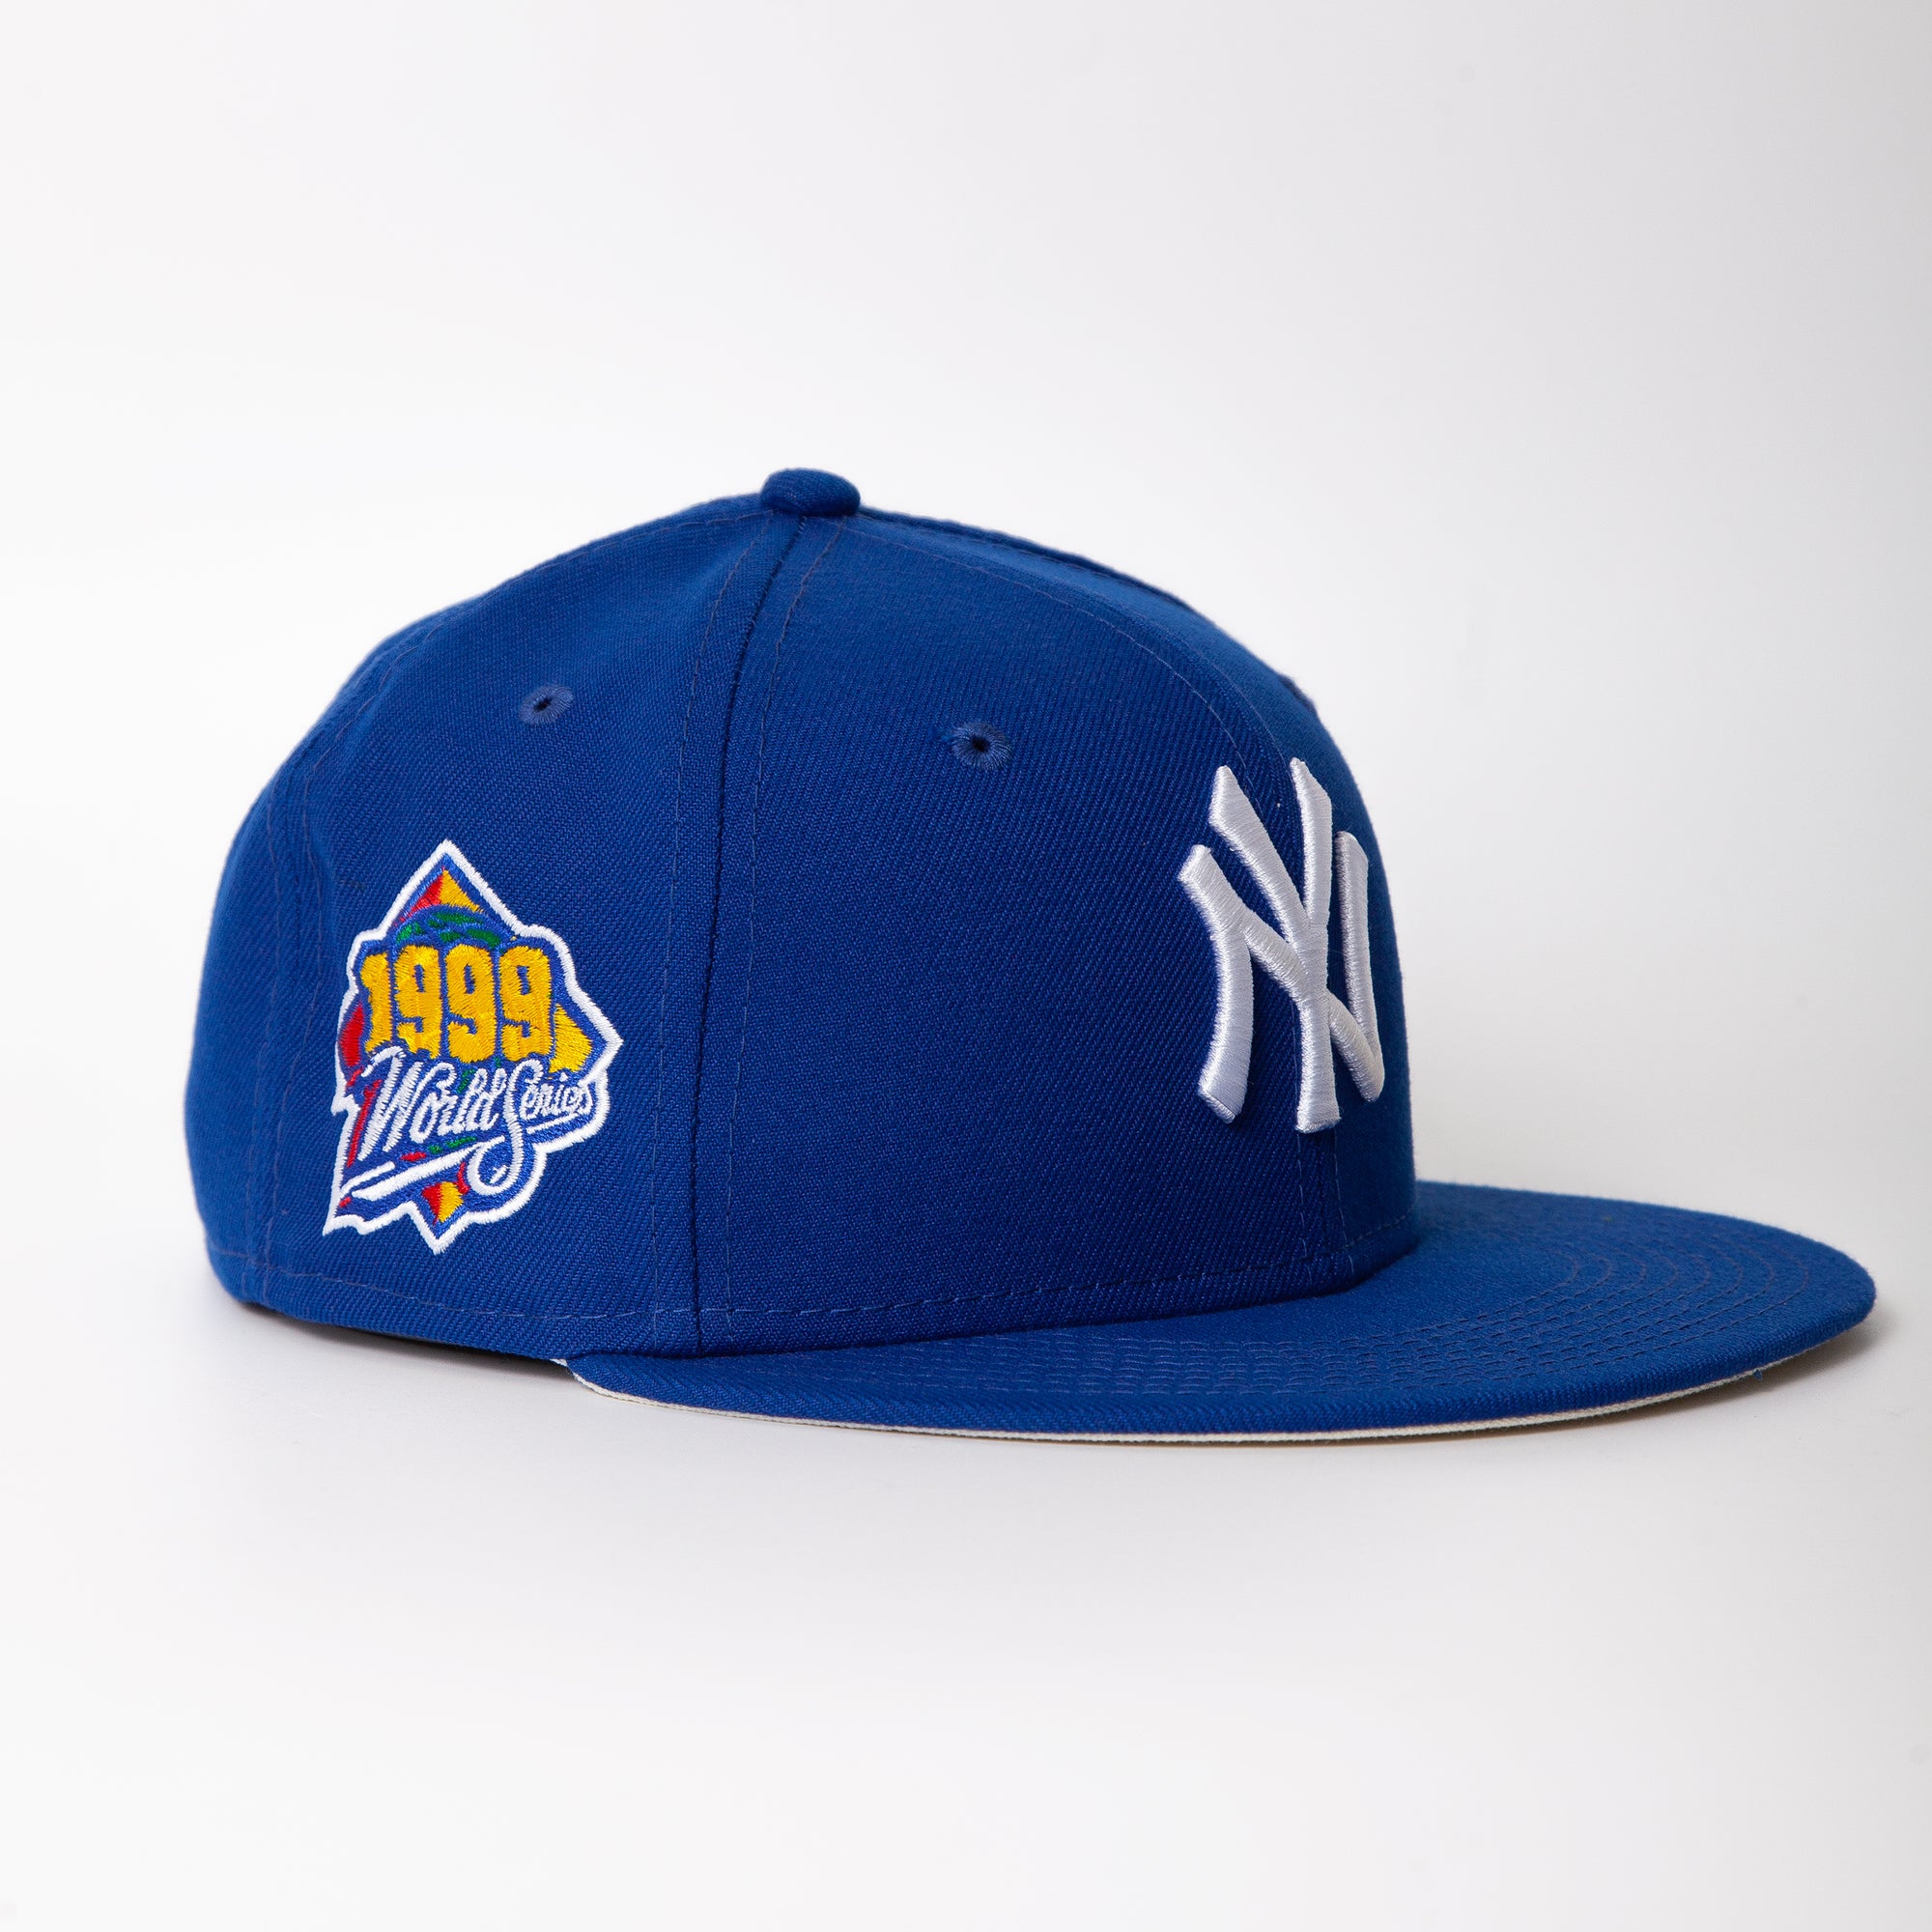 NEW ERA - Accessories - NY Yankees 1999 WS Custom Fitted - Navy